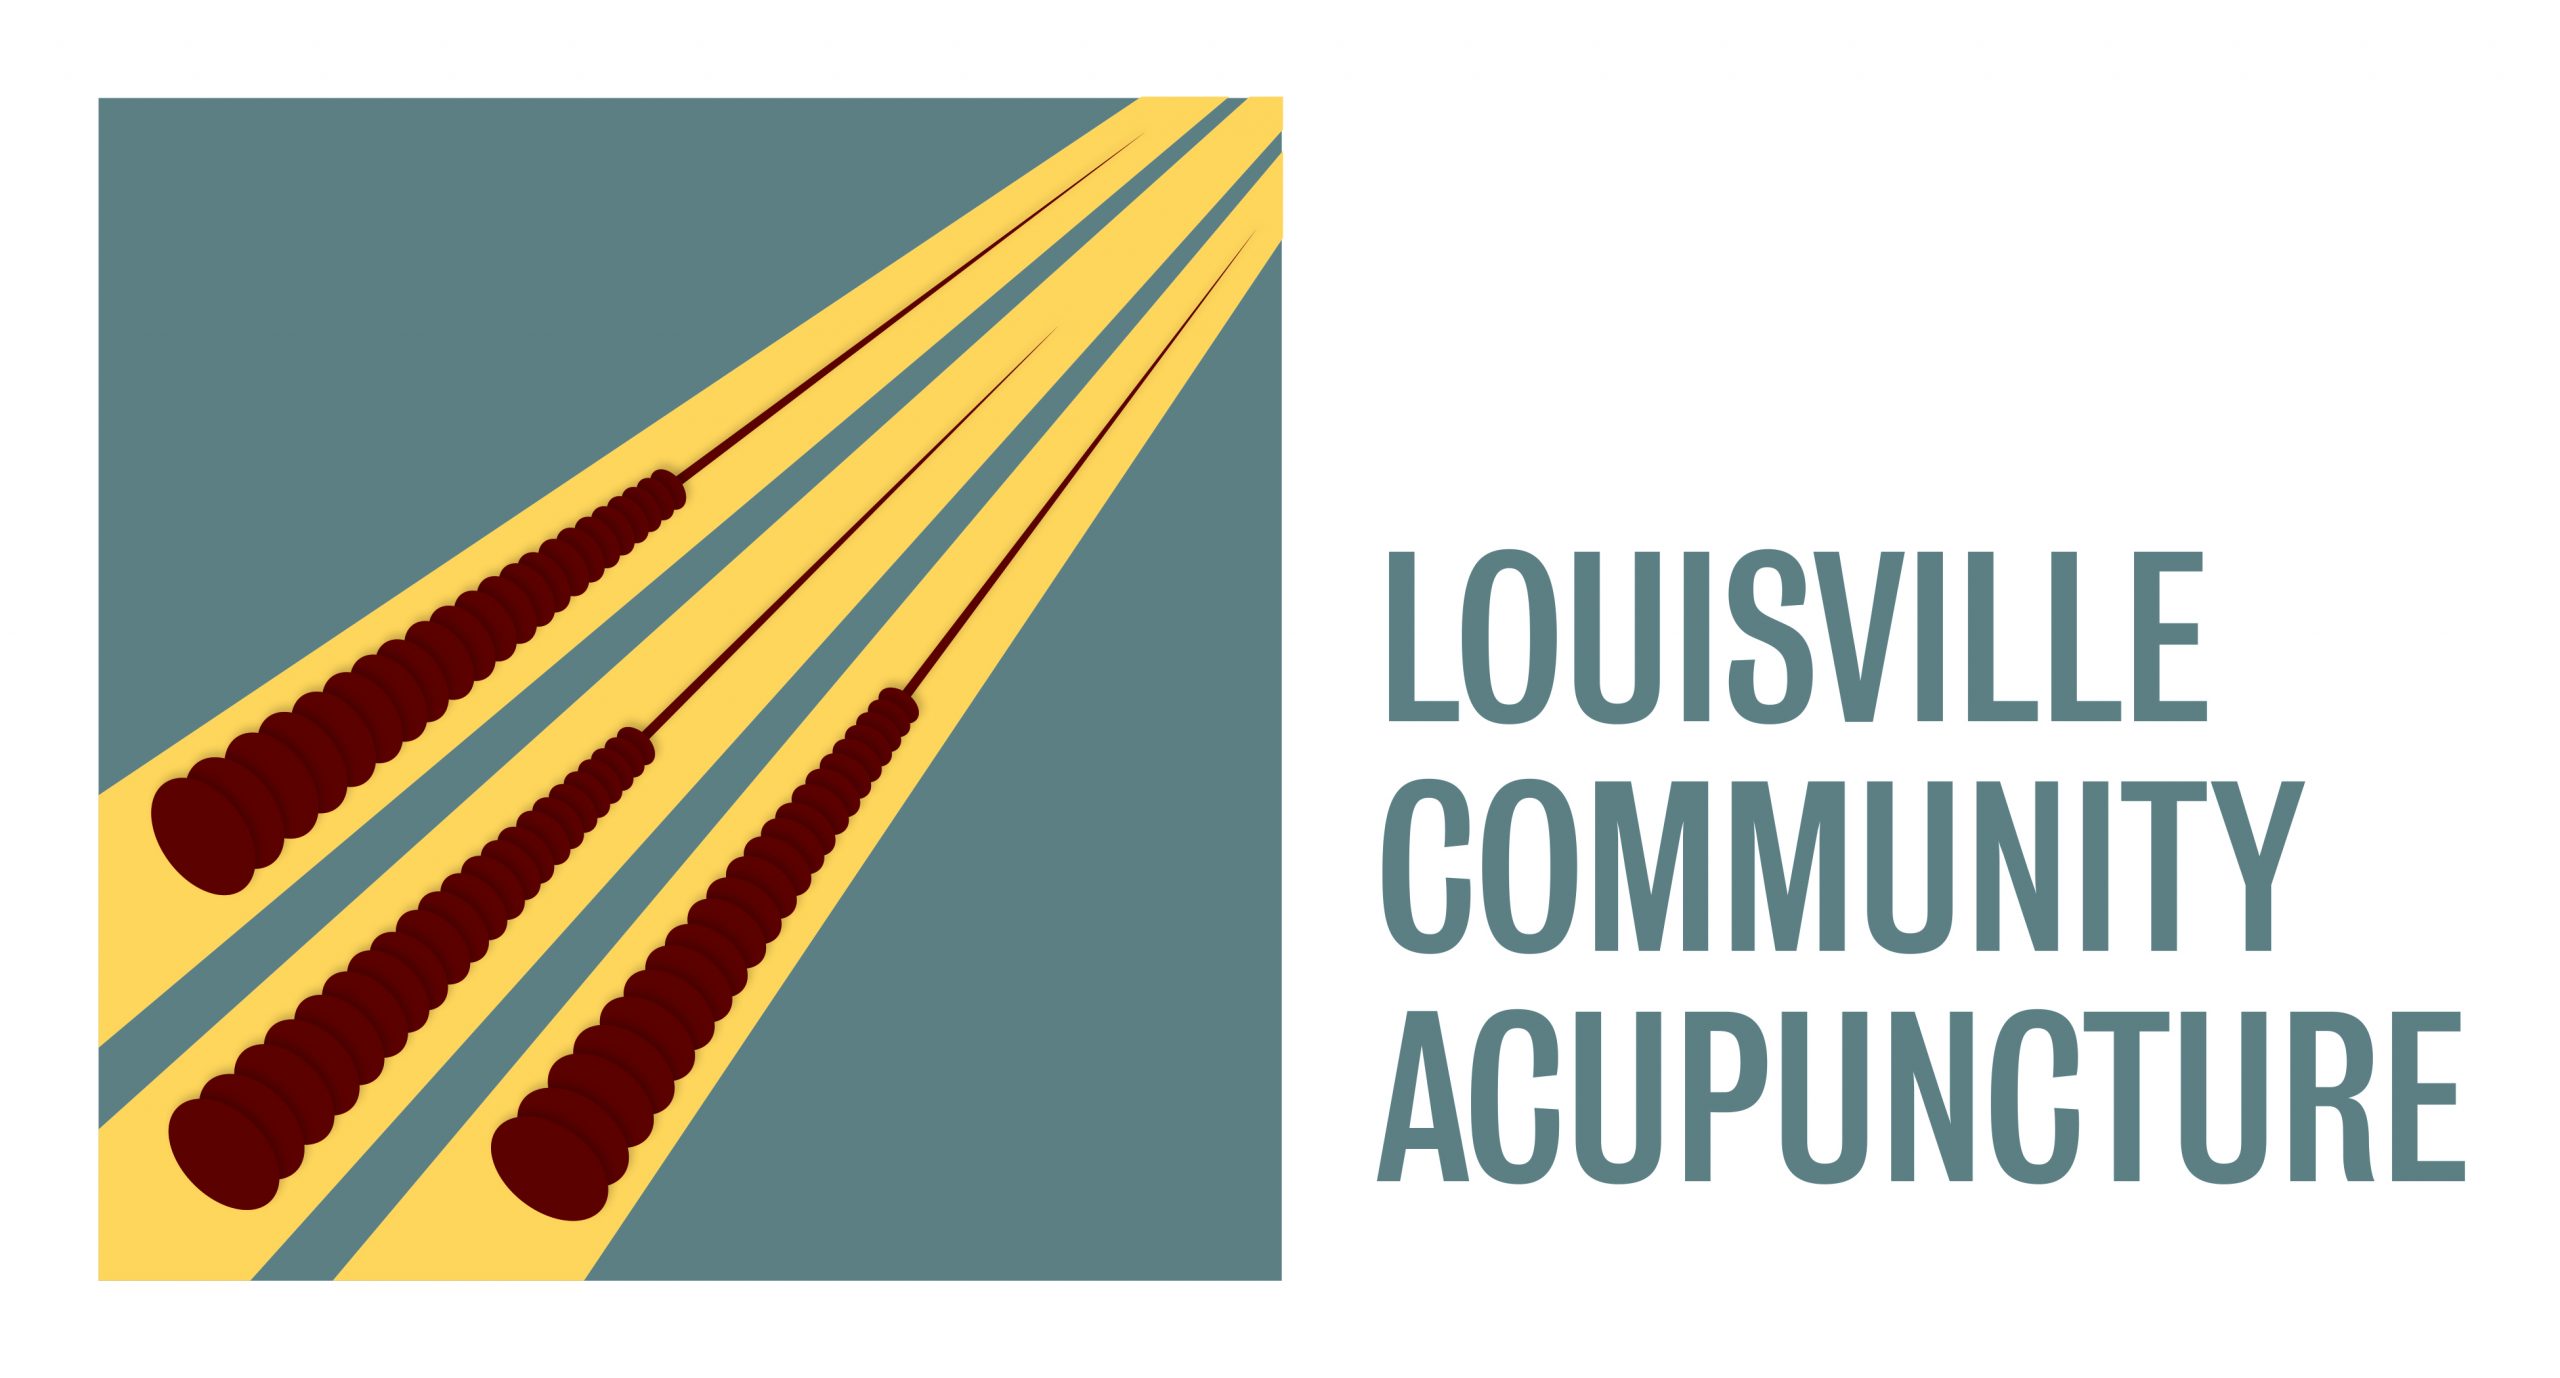 Affordable Acupuncture KY